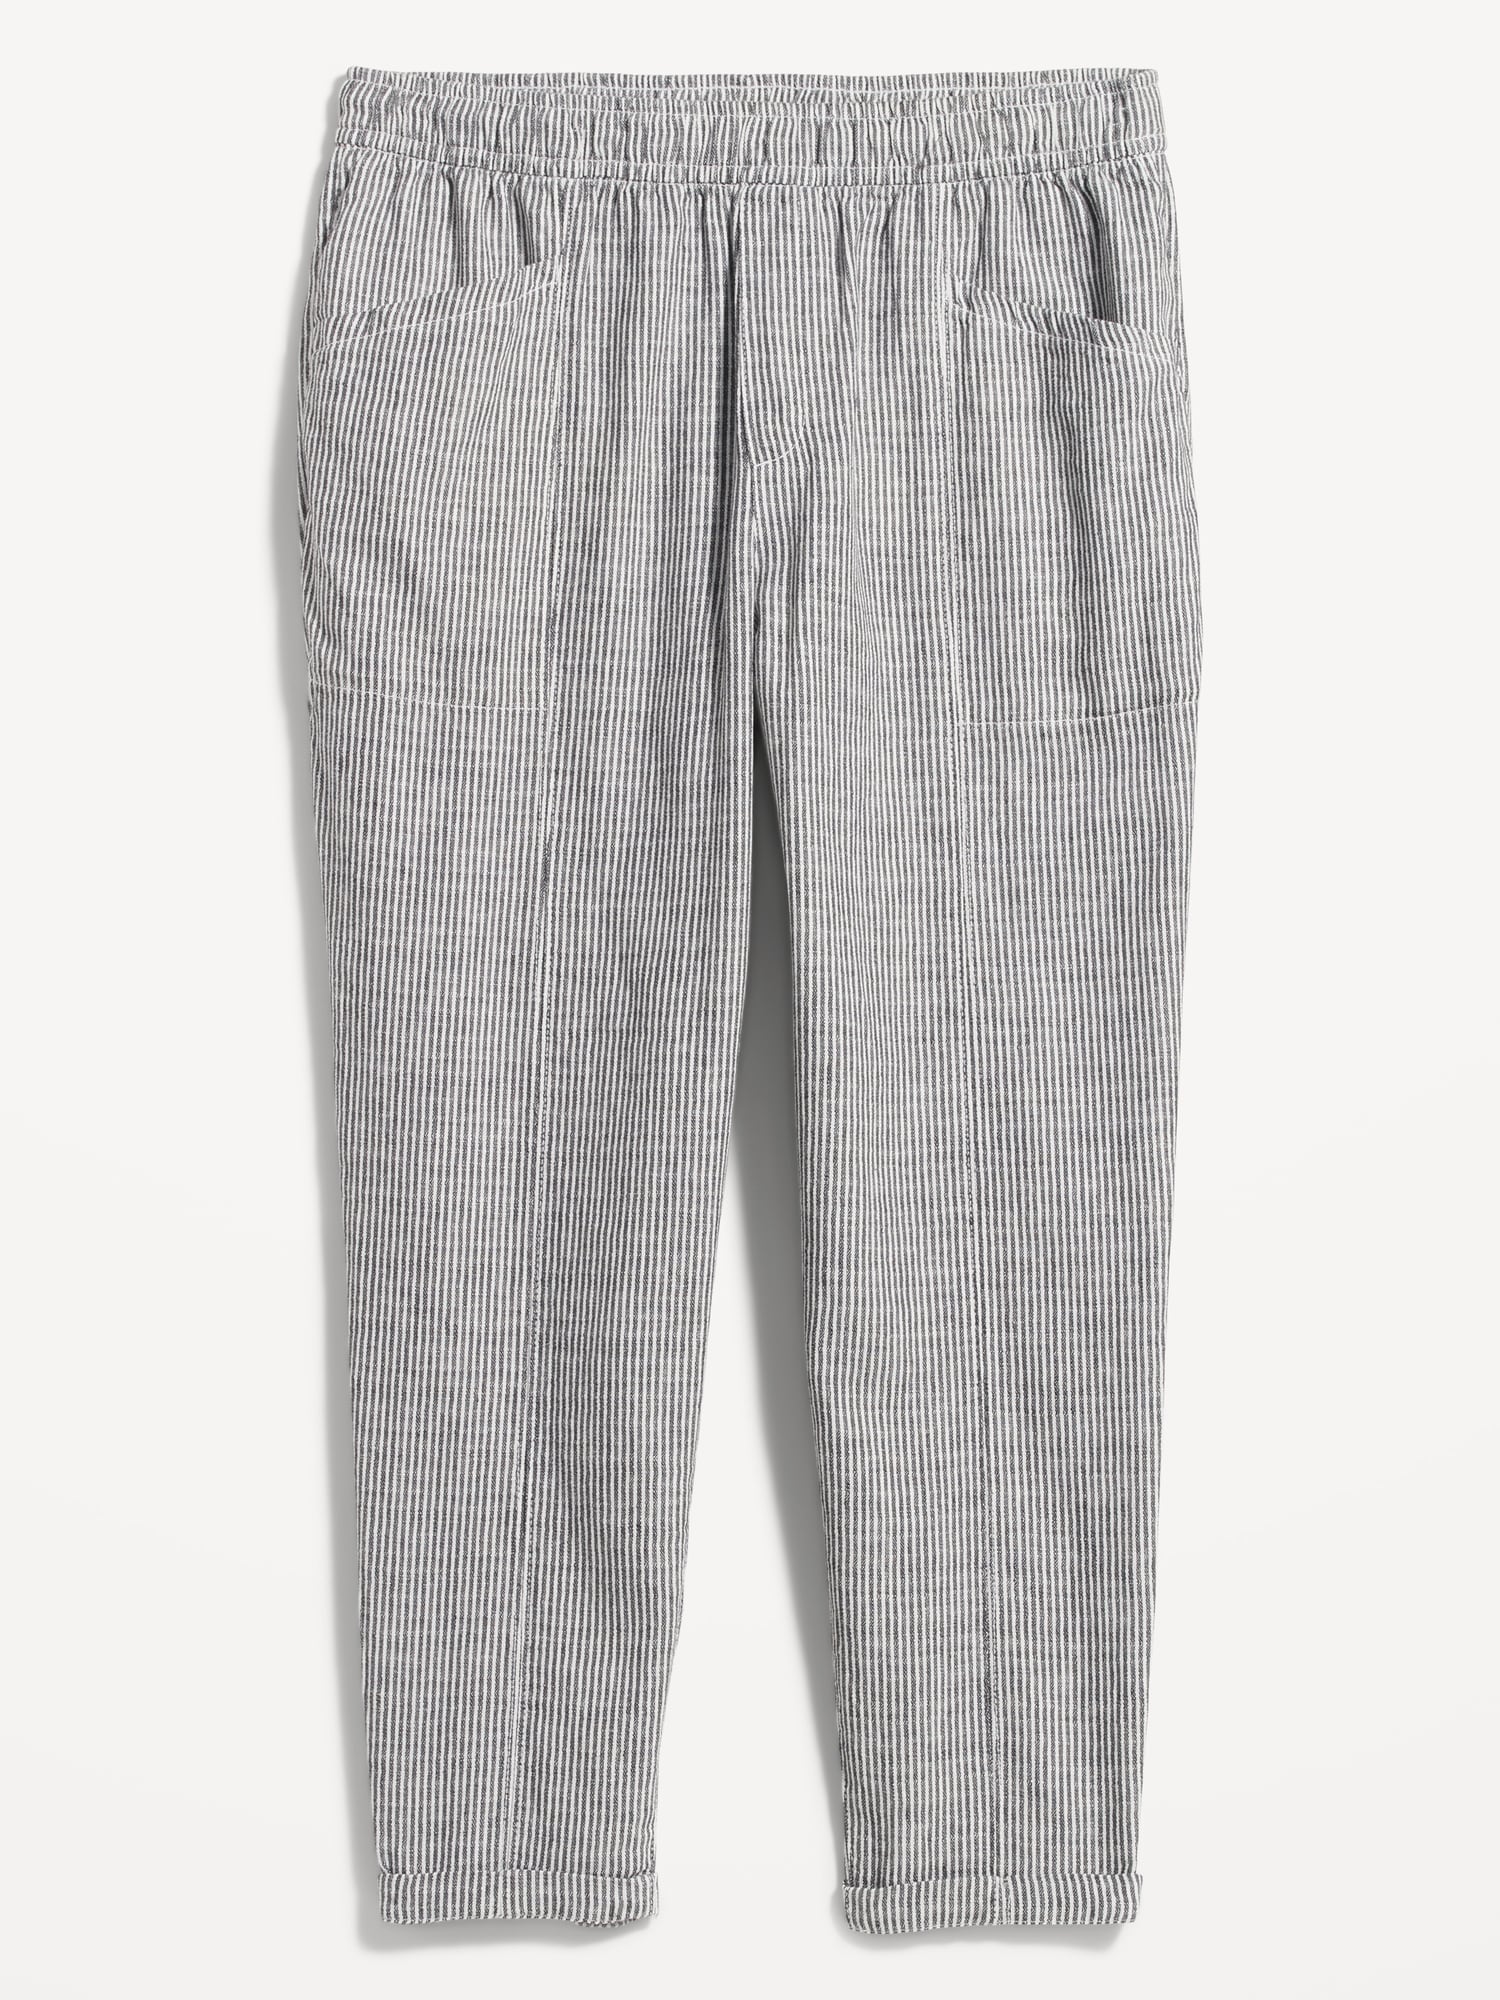 Linen Cotton Tapered Pants (Stripe)